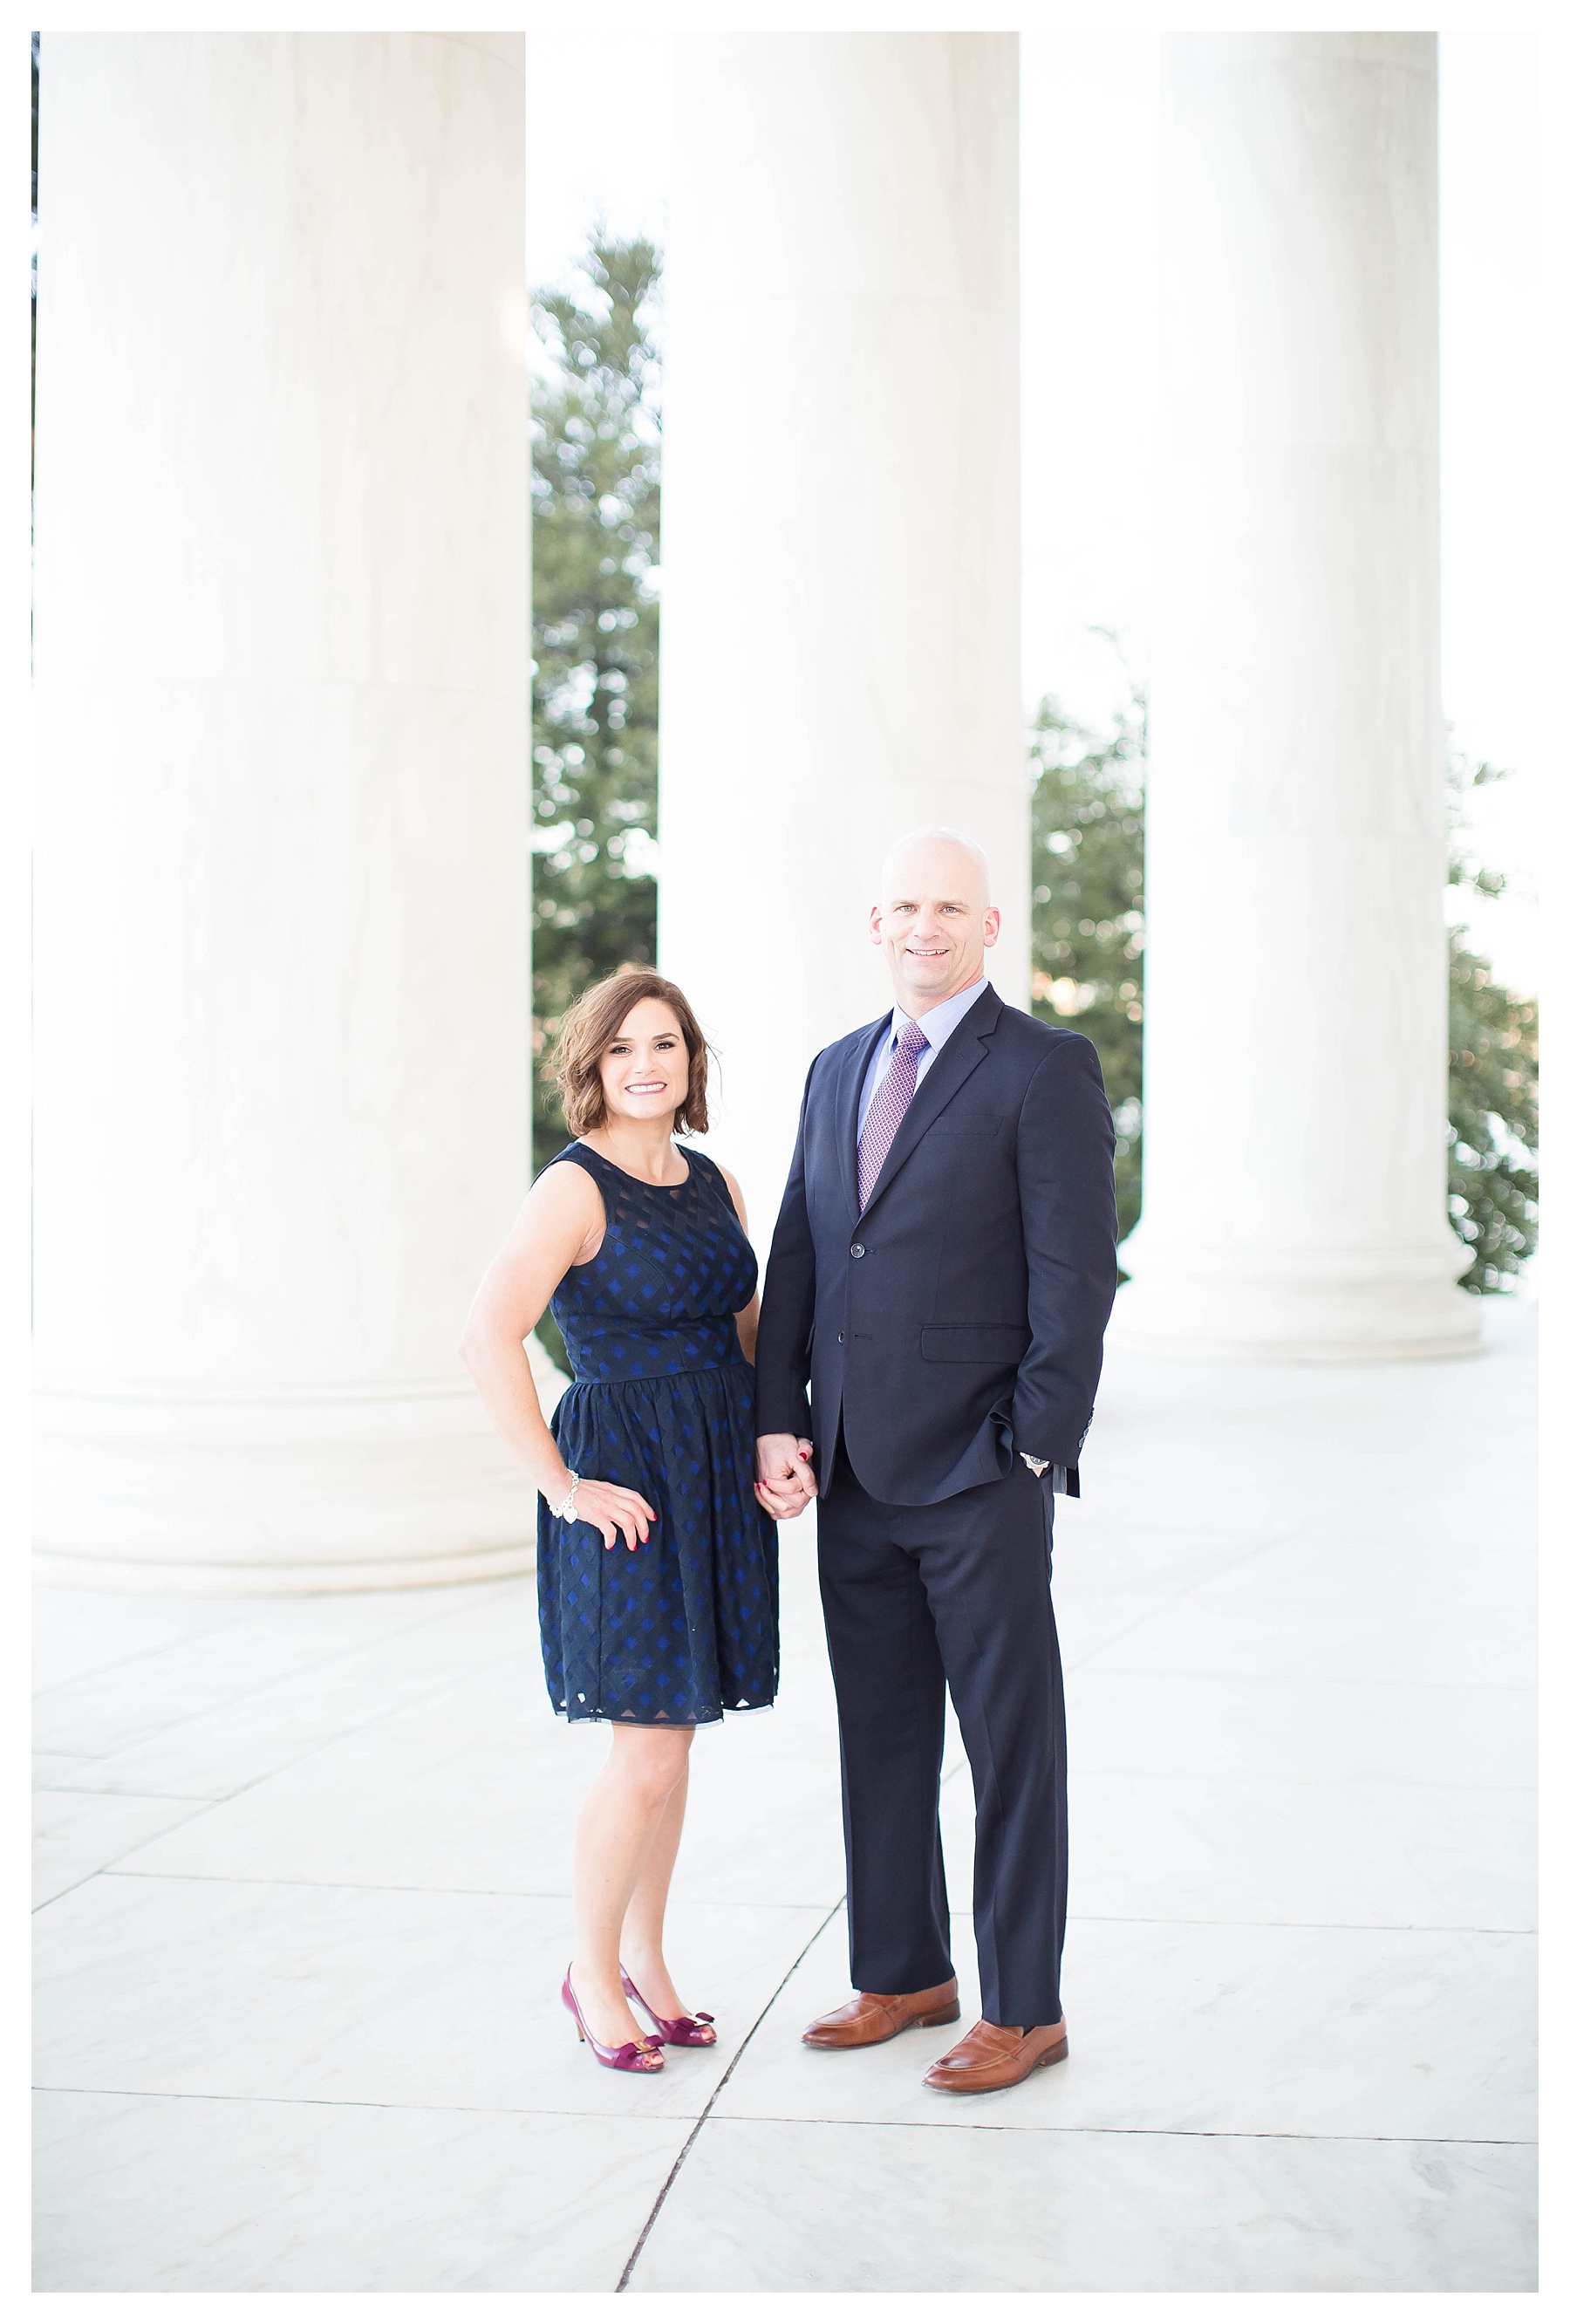 Candice Adelle Photography DC Destination Wedding Photographer Cherry Blossom Engagment Session_0044.jpg